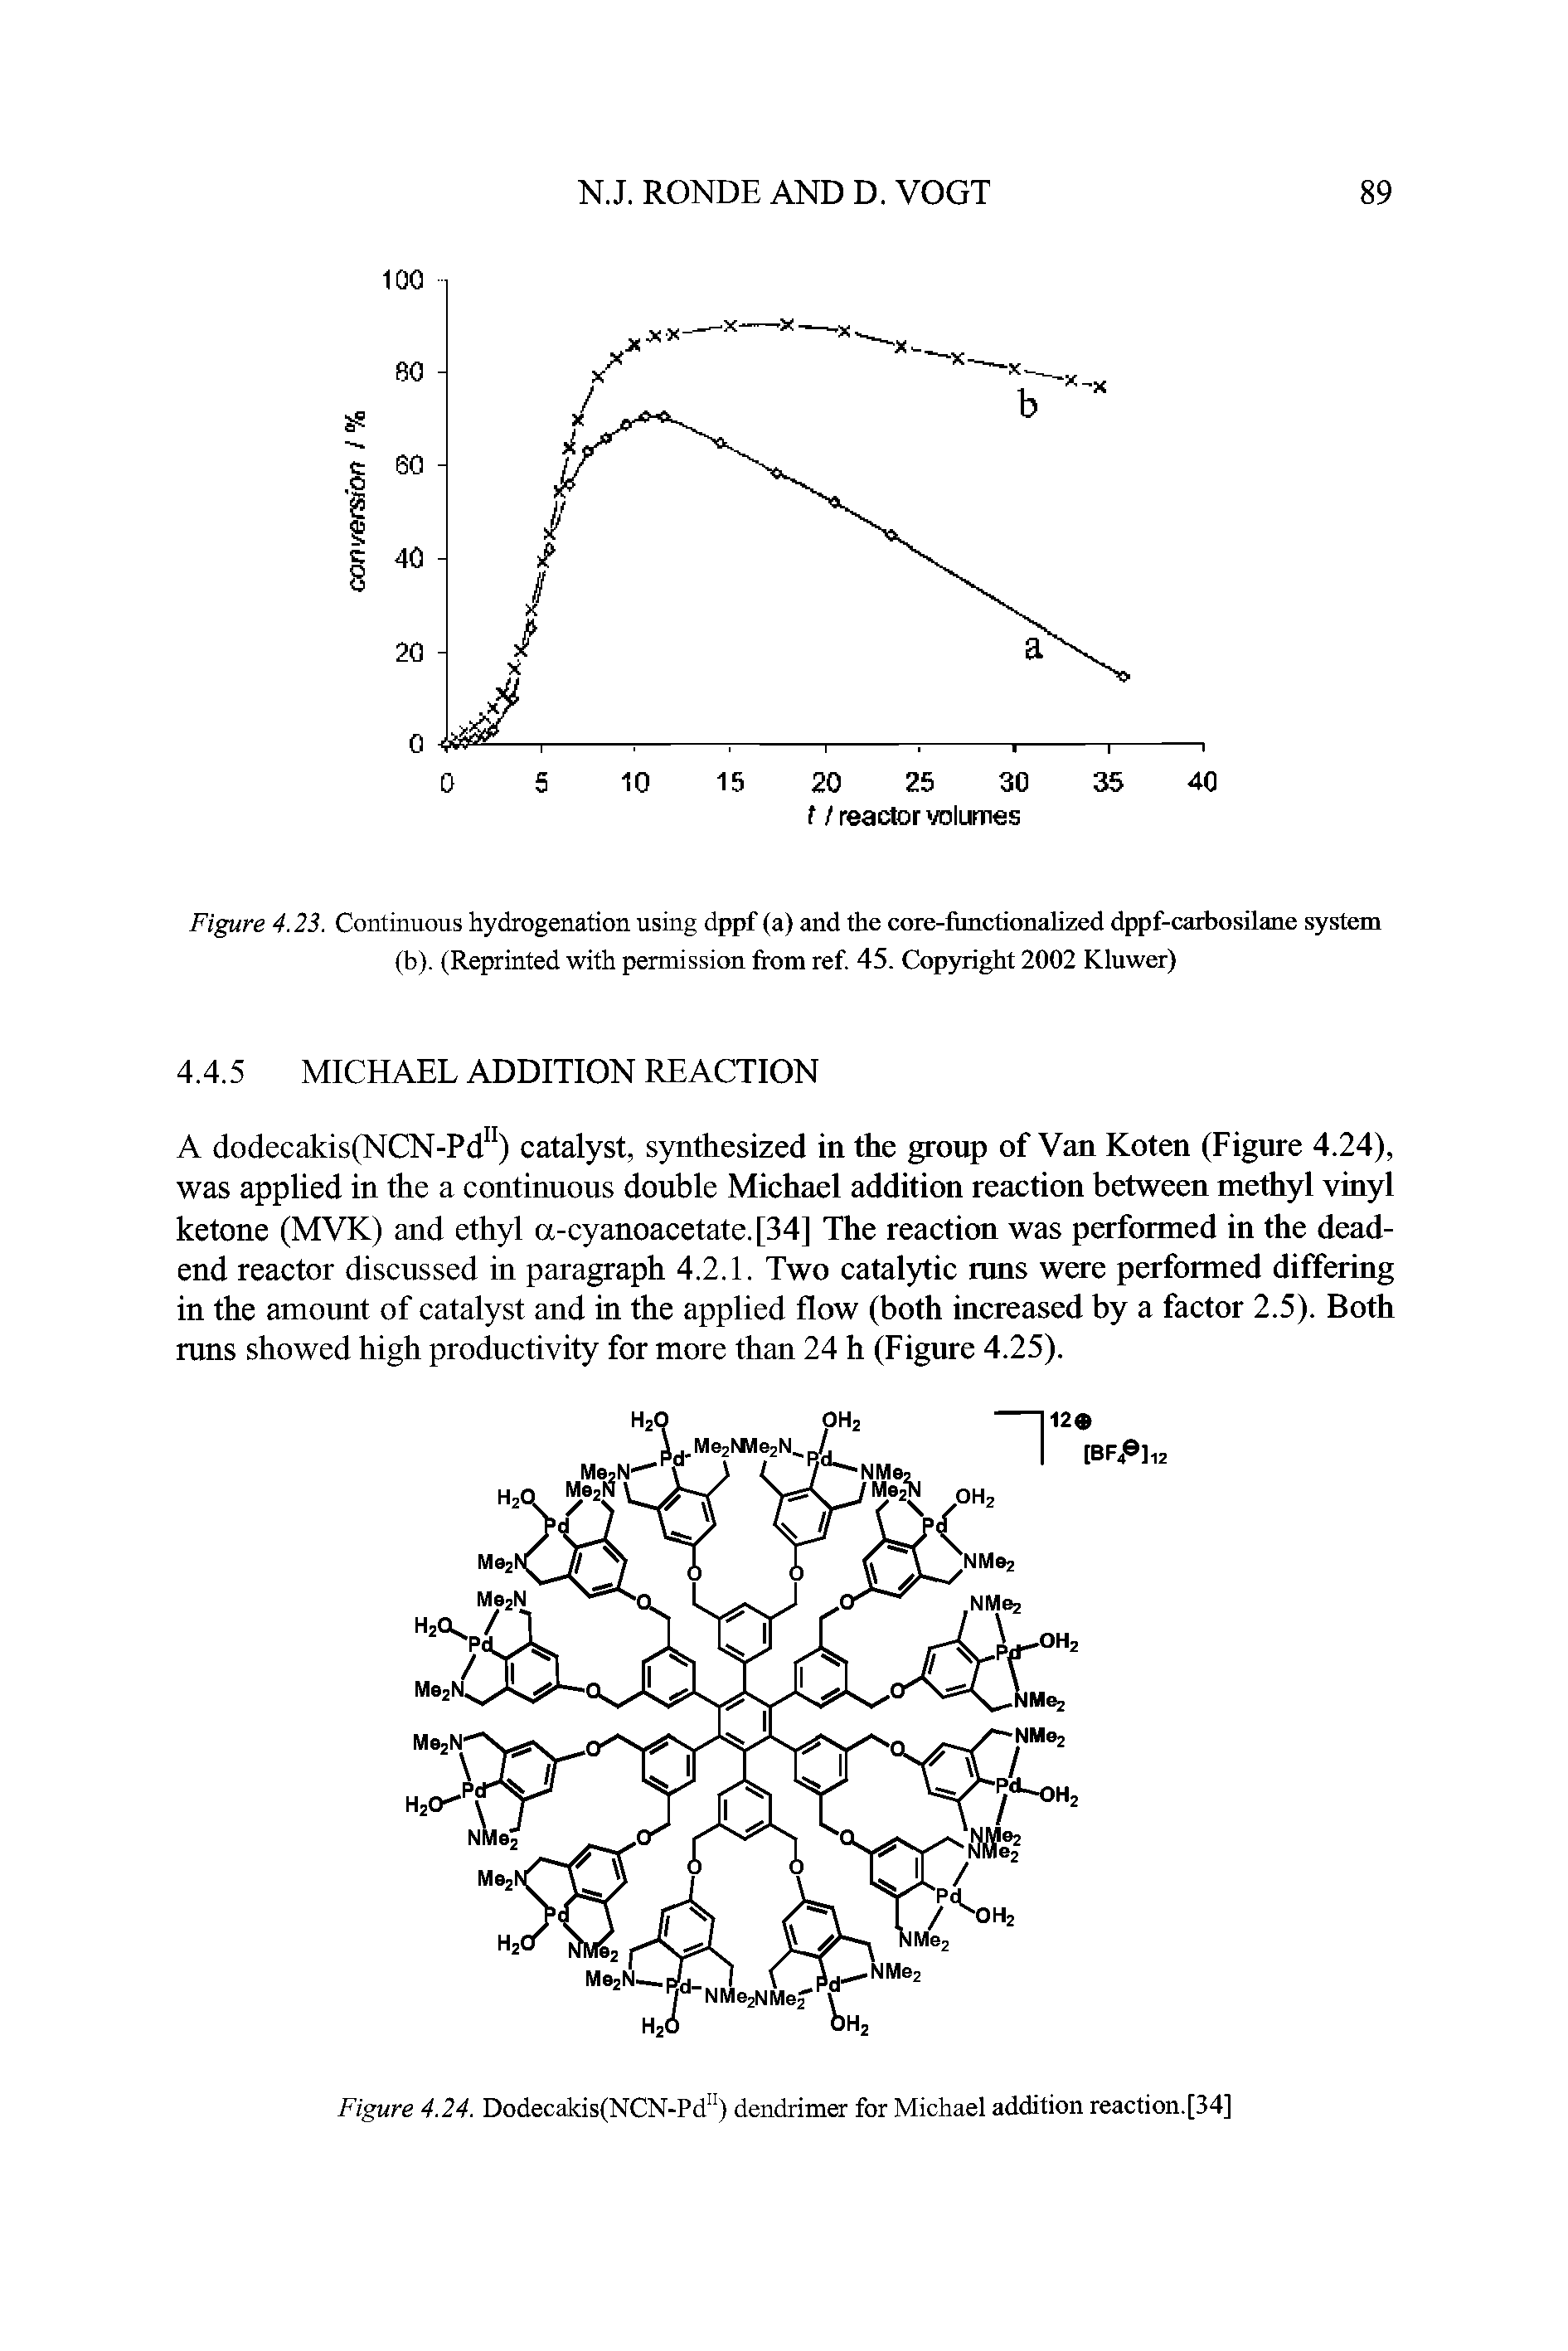 Figure 4.24. Dodecakis(NCN-Pdn) dendrimer for Michael addition reaction.[34]...